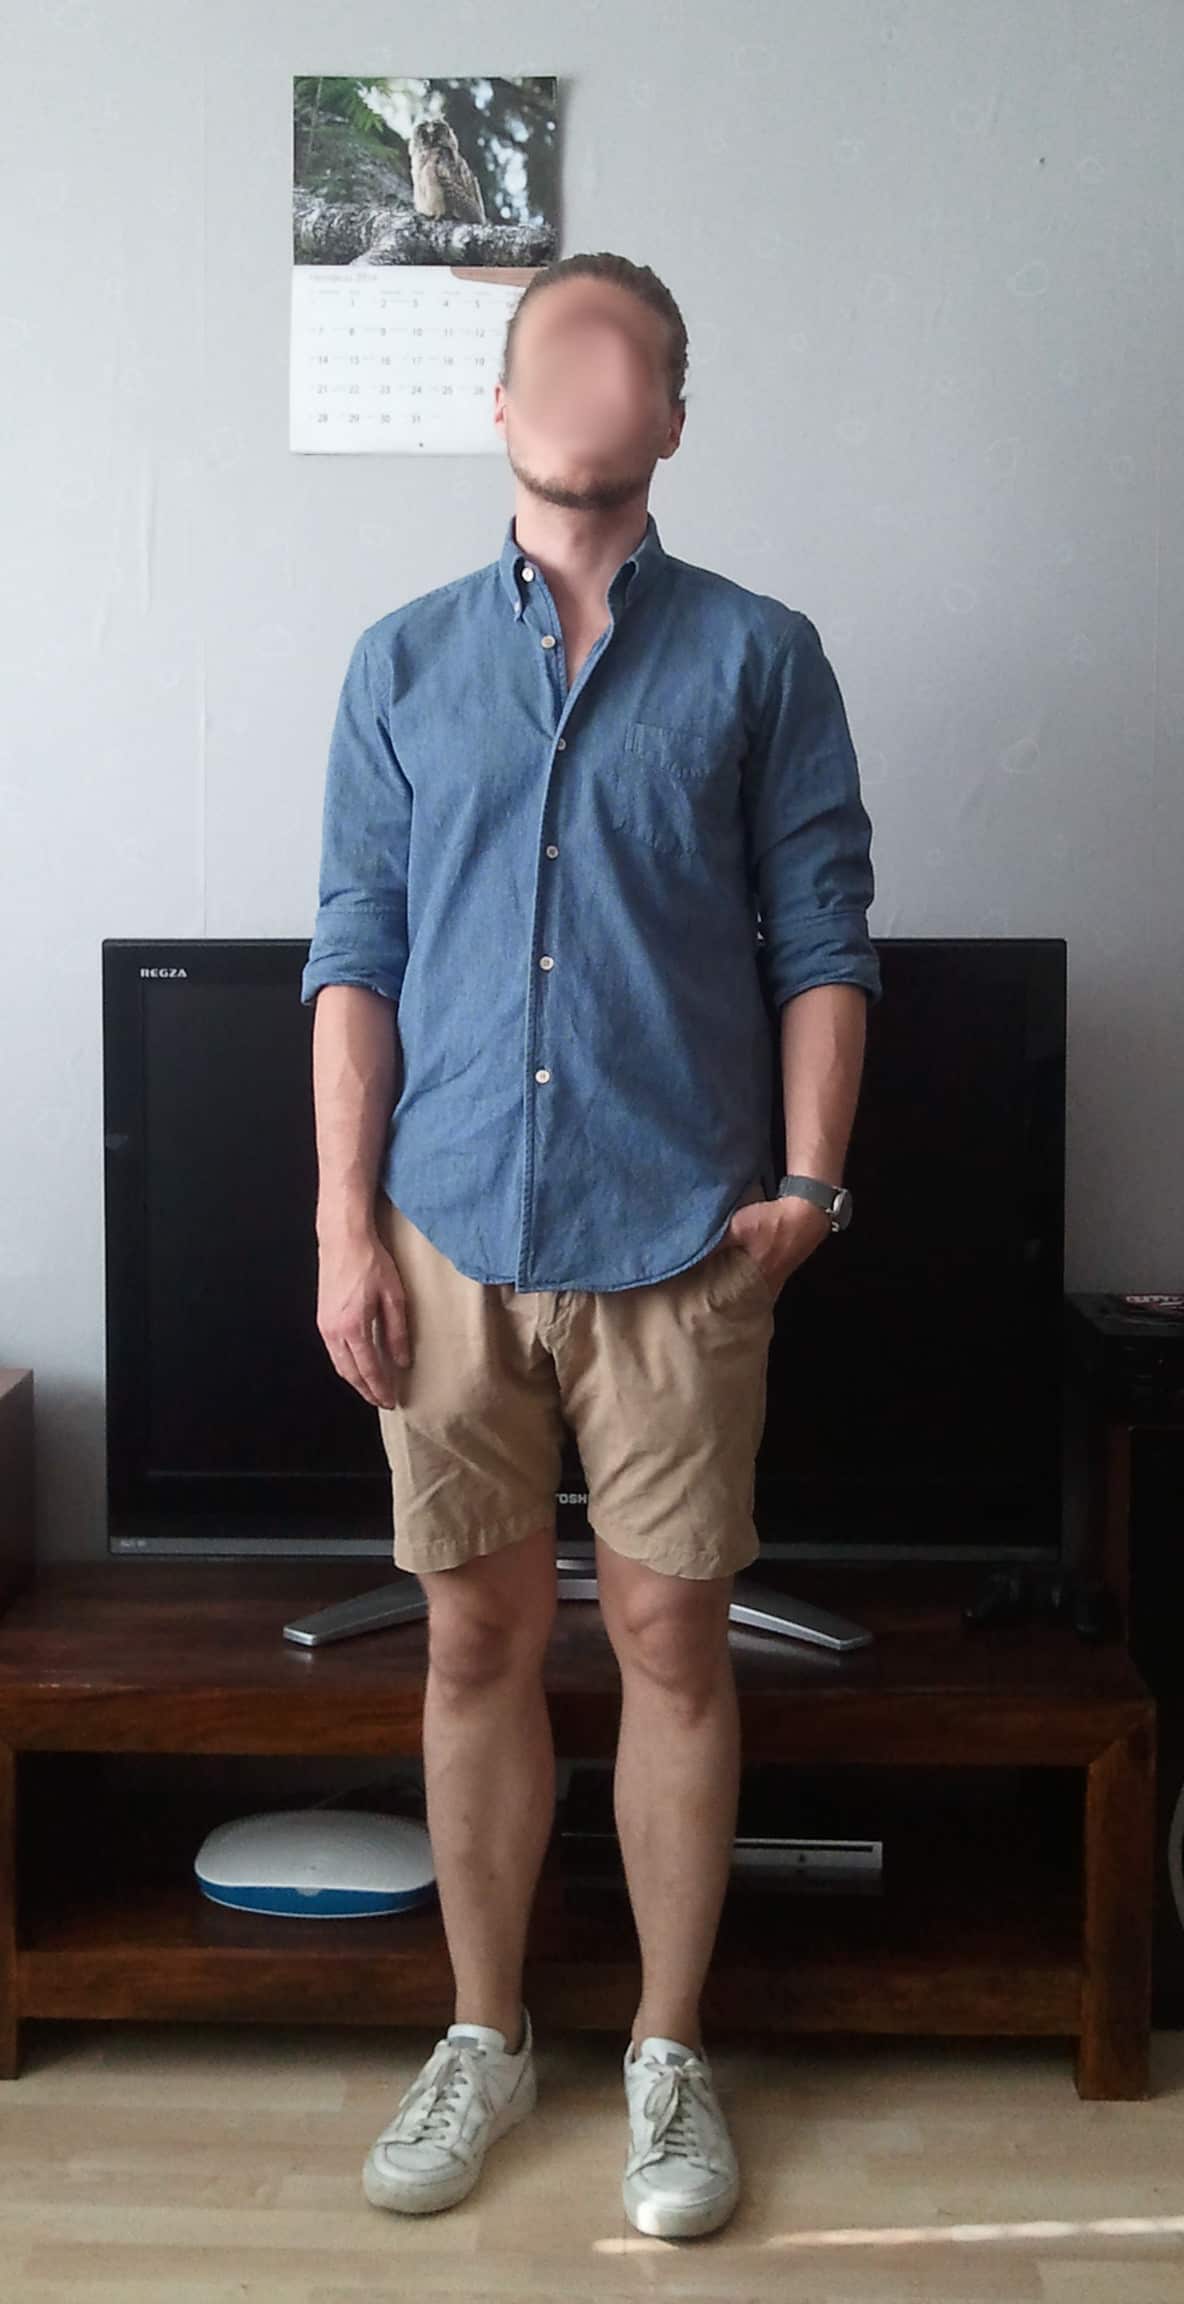 How Men's Shorts Should Properly Fit!  A SIMPLE GUIDE TO MEN'S SHORTS FIT  